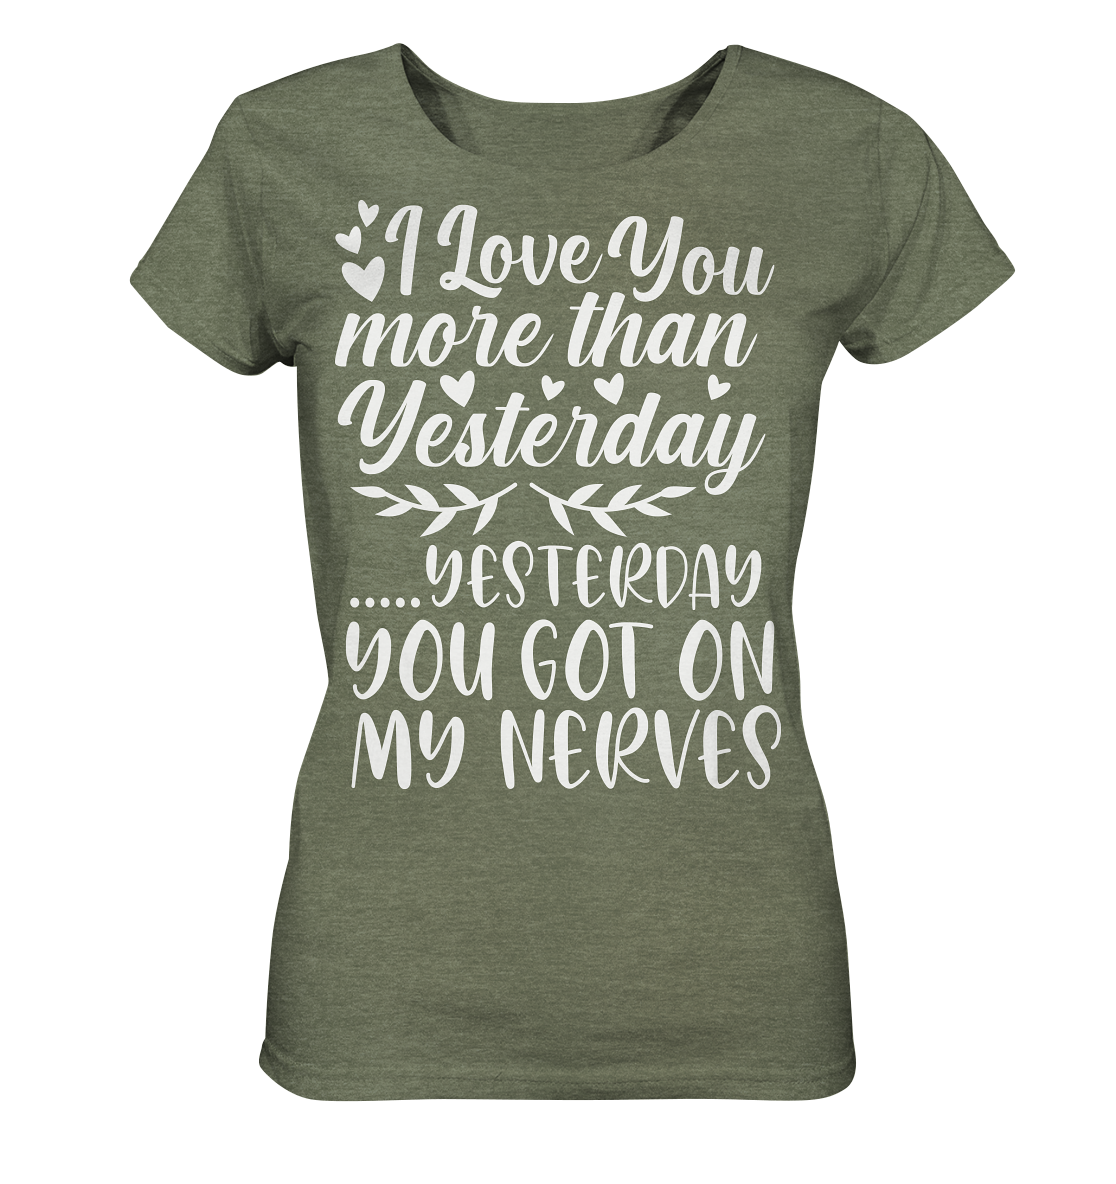 I love you more than yesterday  - Ladies Organic Shirt (meliert)